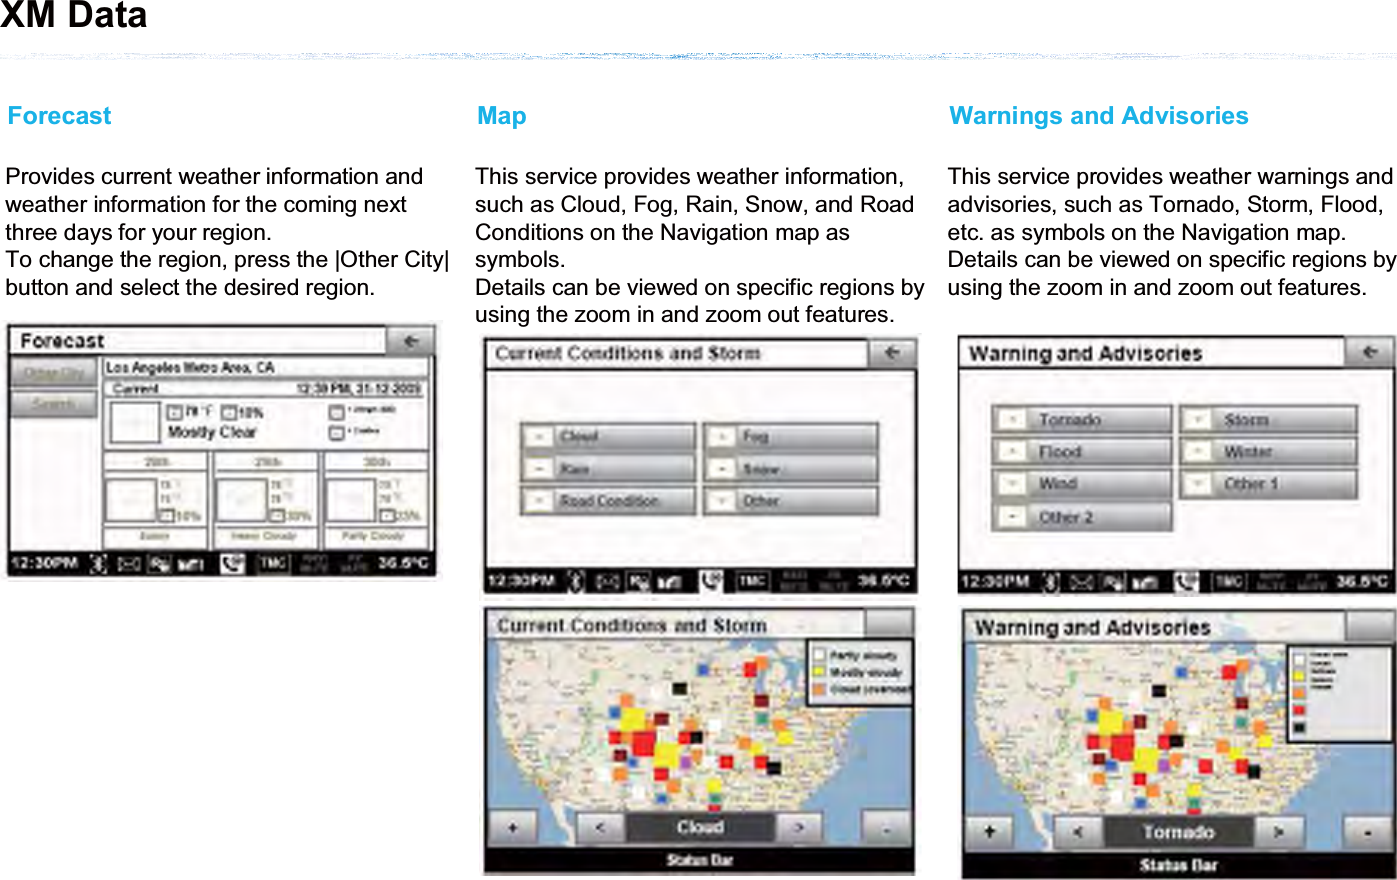 Provides current weather information and weather information for the coming next three days for your region.To change the region, press the |Other City| button and select the desired region.ForecastThis service provides weather information, such as Cloud, Fog, Rain, Snow, and Road Conditions on the Navigation map as symbols.Details can be viewed on specific regions by using the zoom in and zoom out features.MapThis service provides weather warnings and advisories, such as Tornado, Storm, Flood, etc. as symbols on the Navigation map.Details can be viewed on specific regions by using the zoom in and zoom out features.Warnings and AdvisoriesXM Data